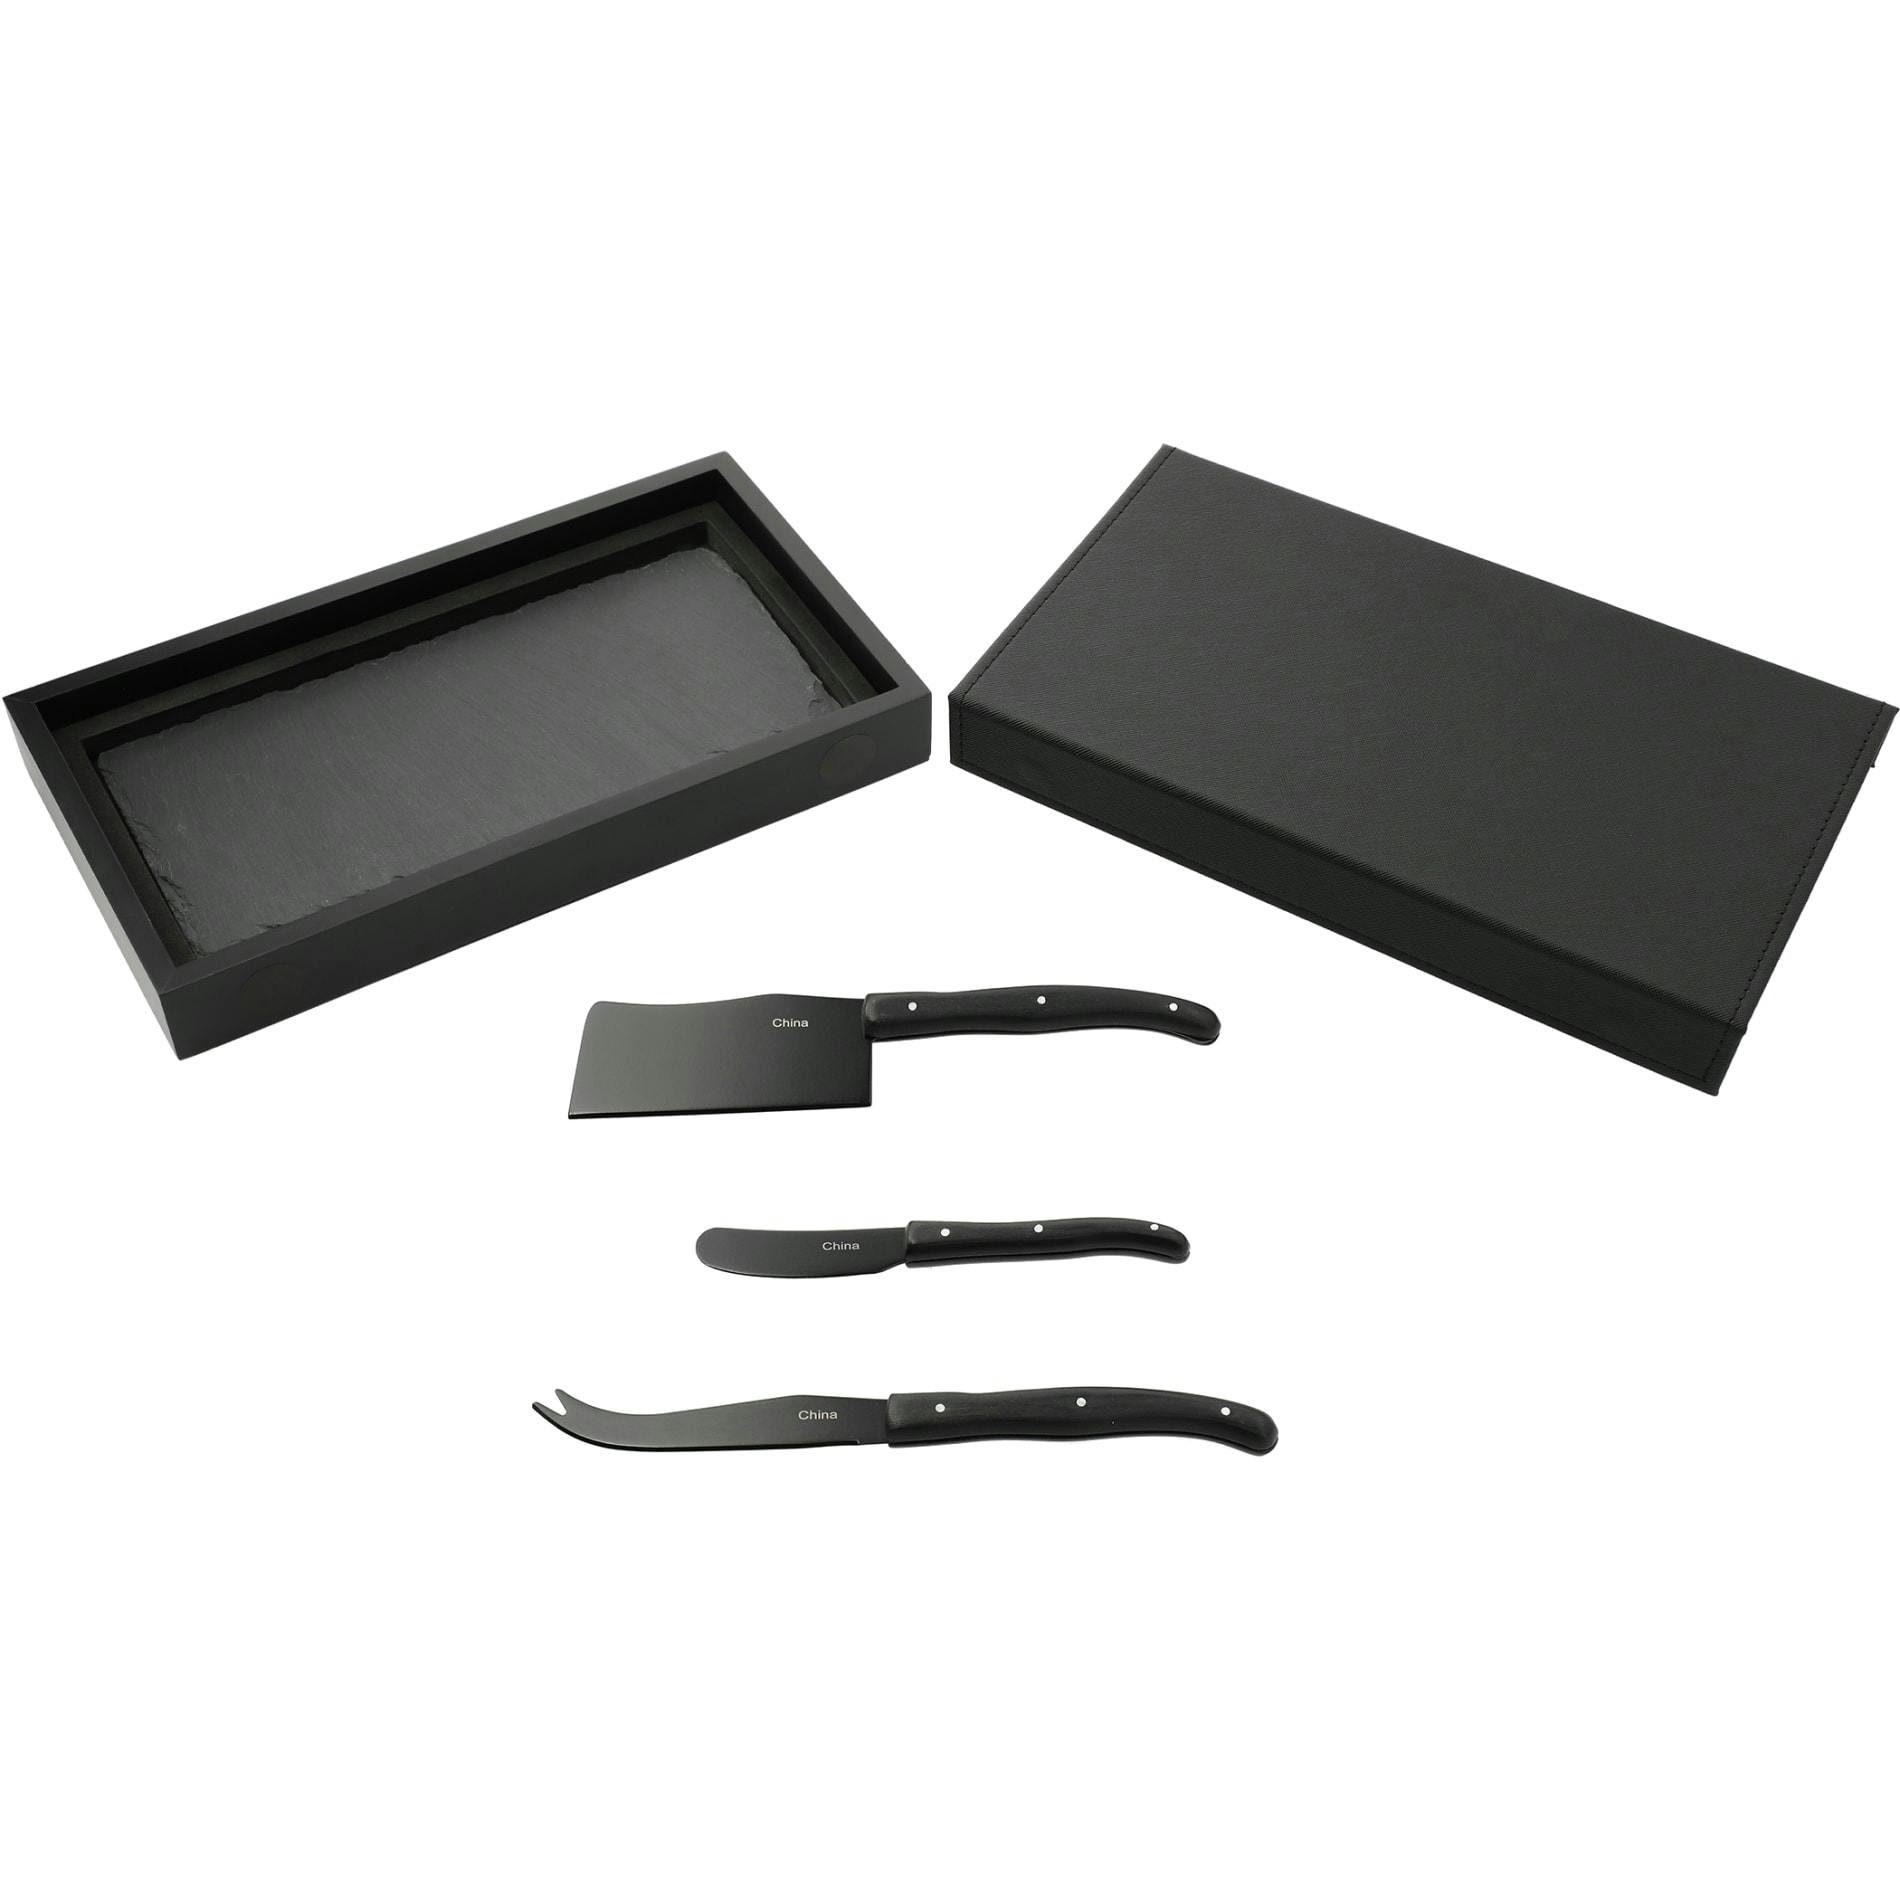 Modena Black Cheese & Serving Set - additional Image 1